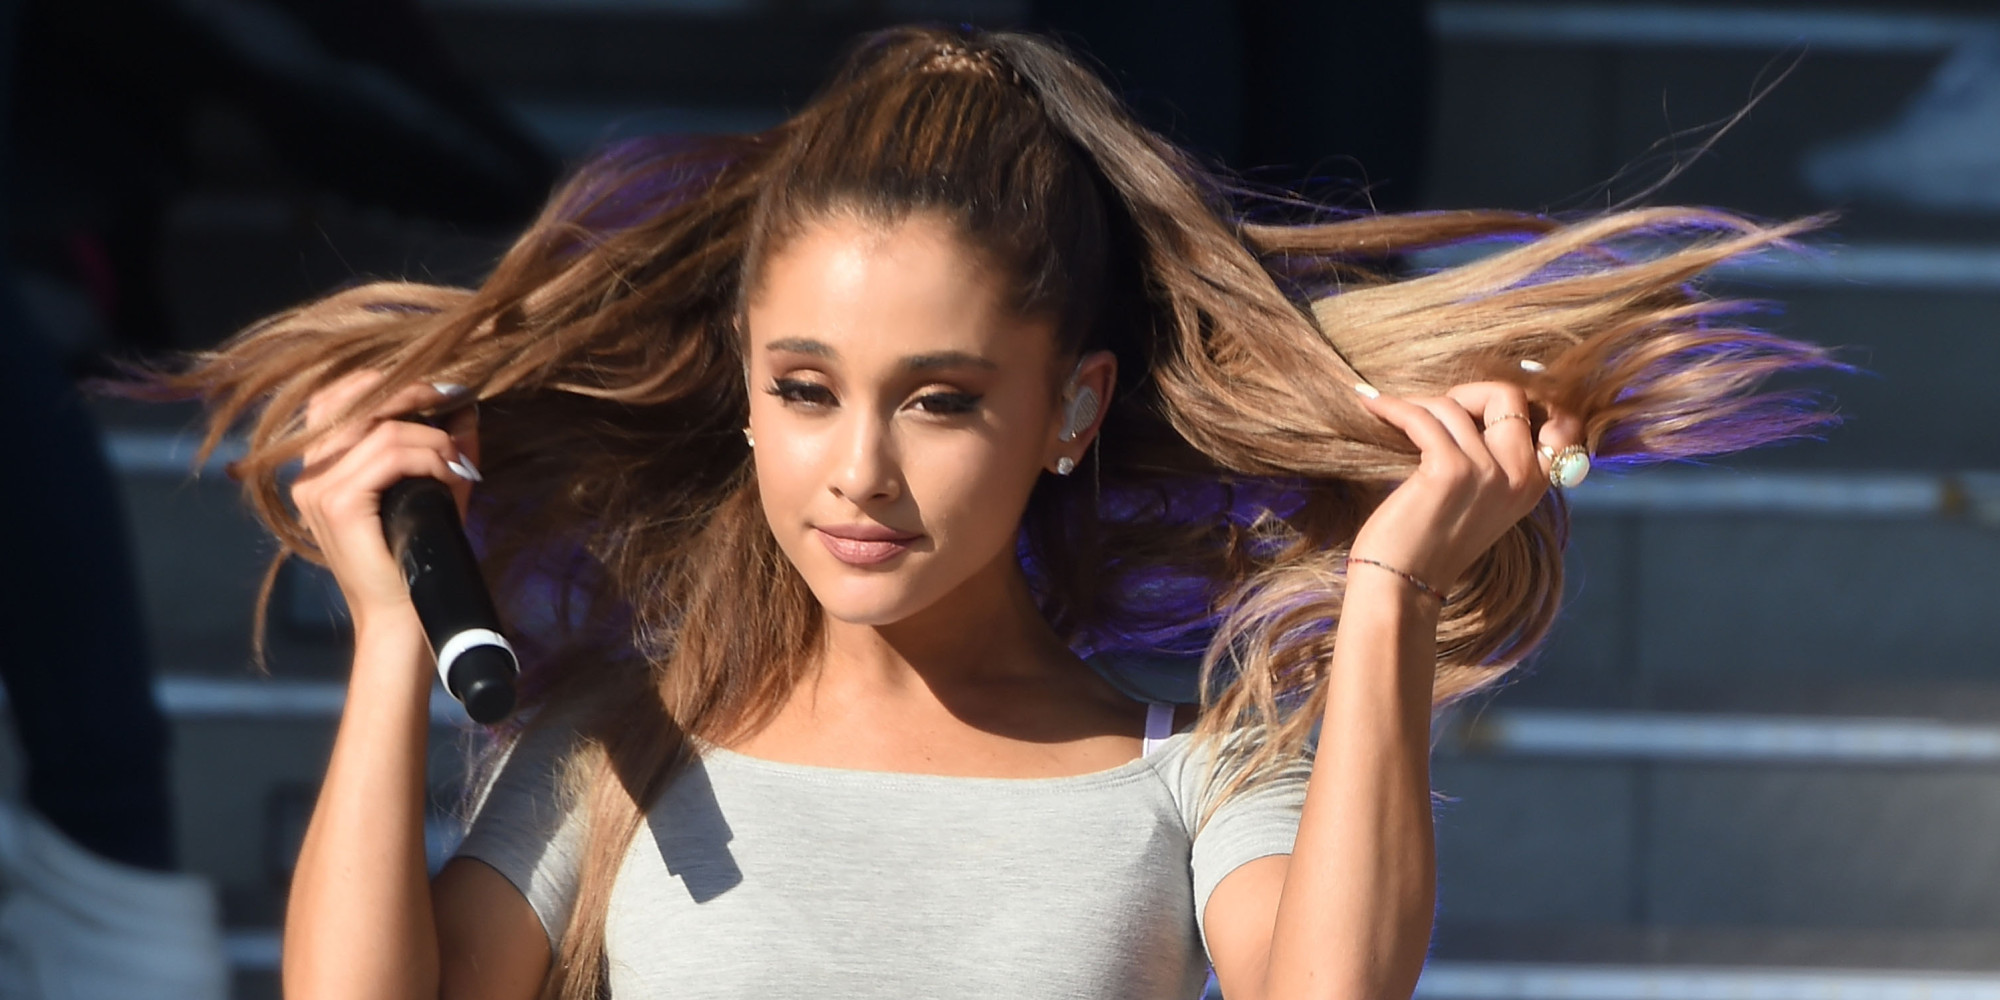 lovely ariana grande reaction look desktop mobile free hd images